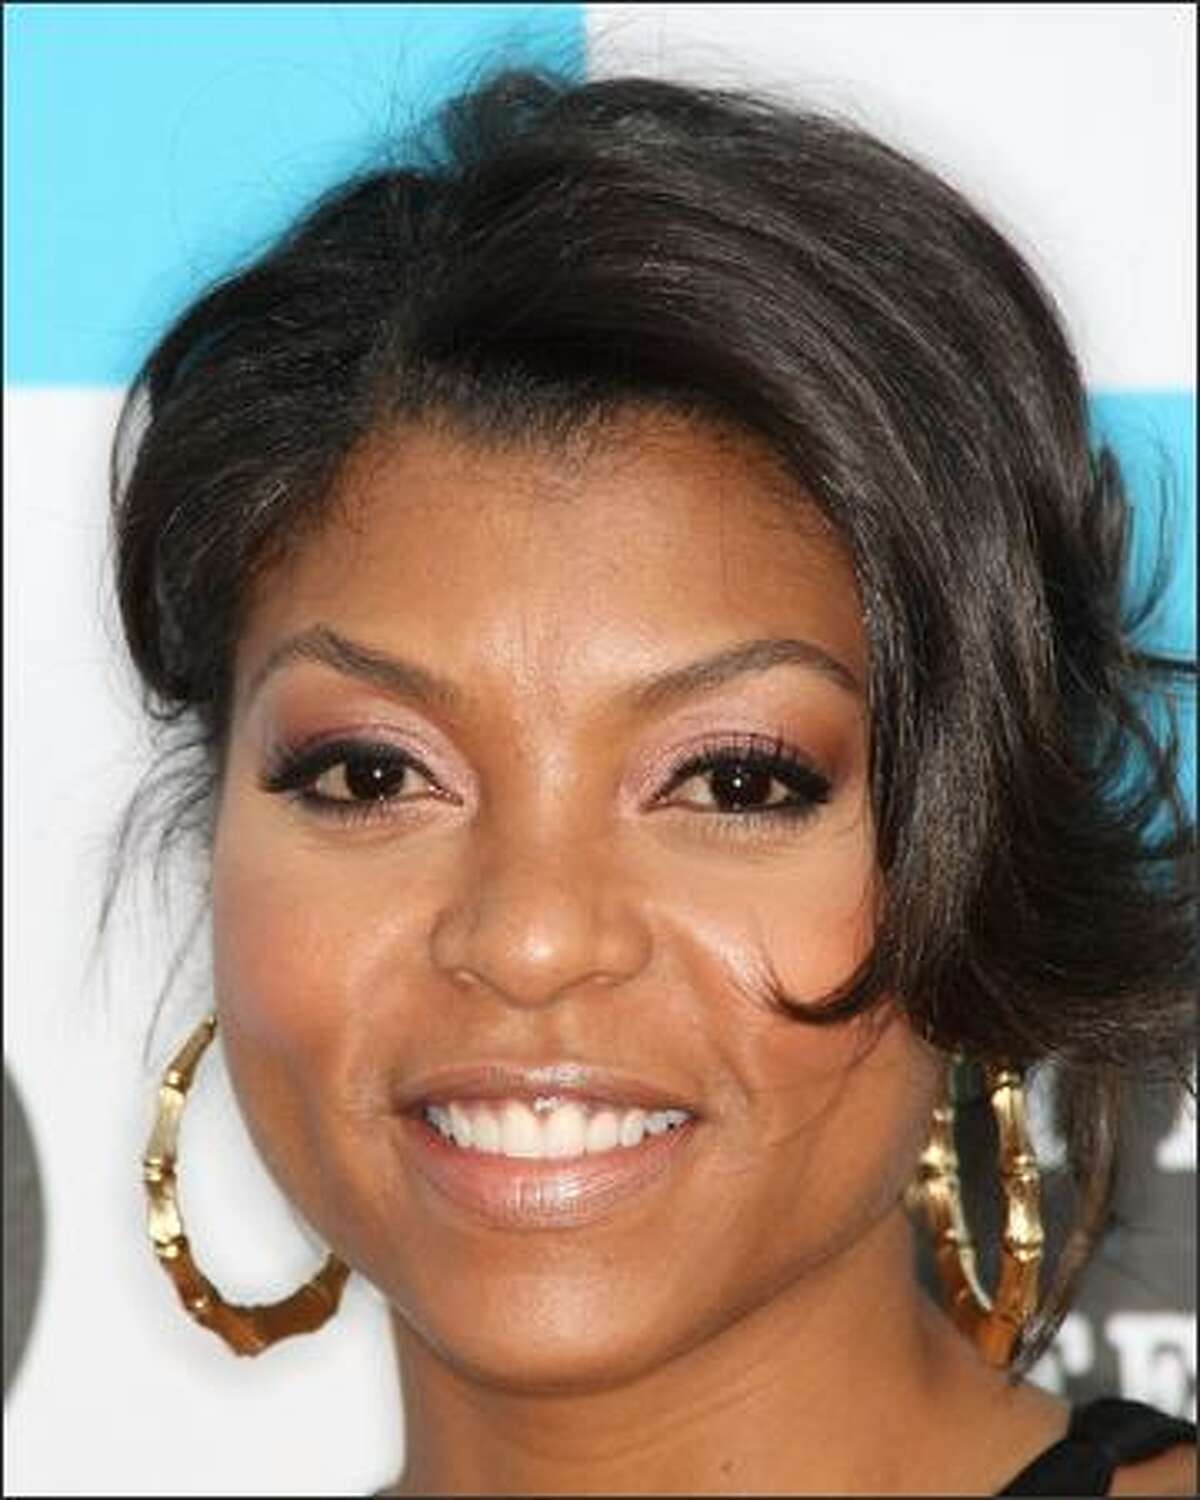 Actress Taraji Henson attends the 2008 Los Angeles Film Festival Awards Ceremony "Spirit of Independence" at the Armand Hammer Museum on Sunday in Westwood, Calif.